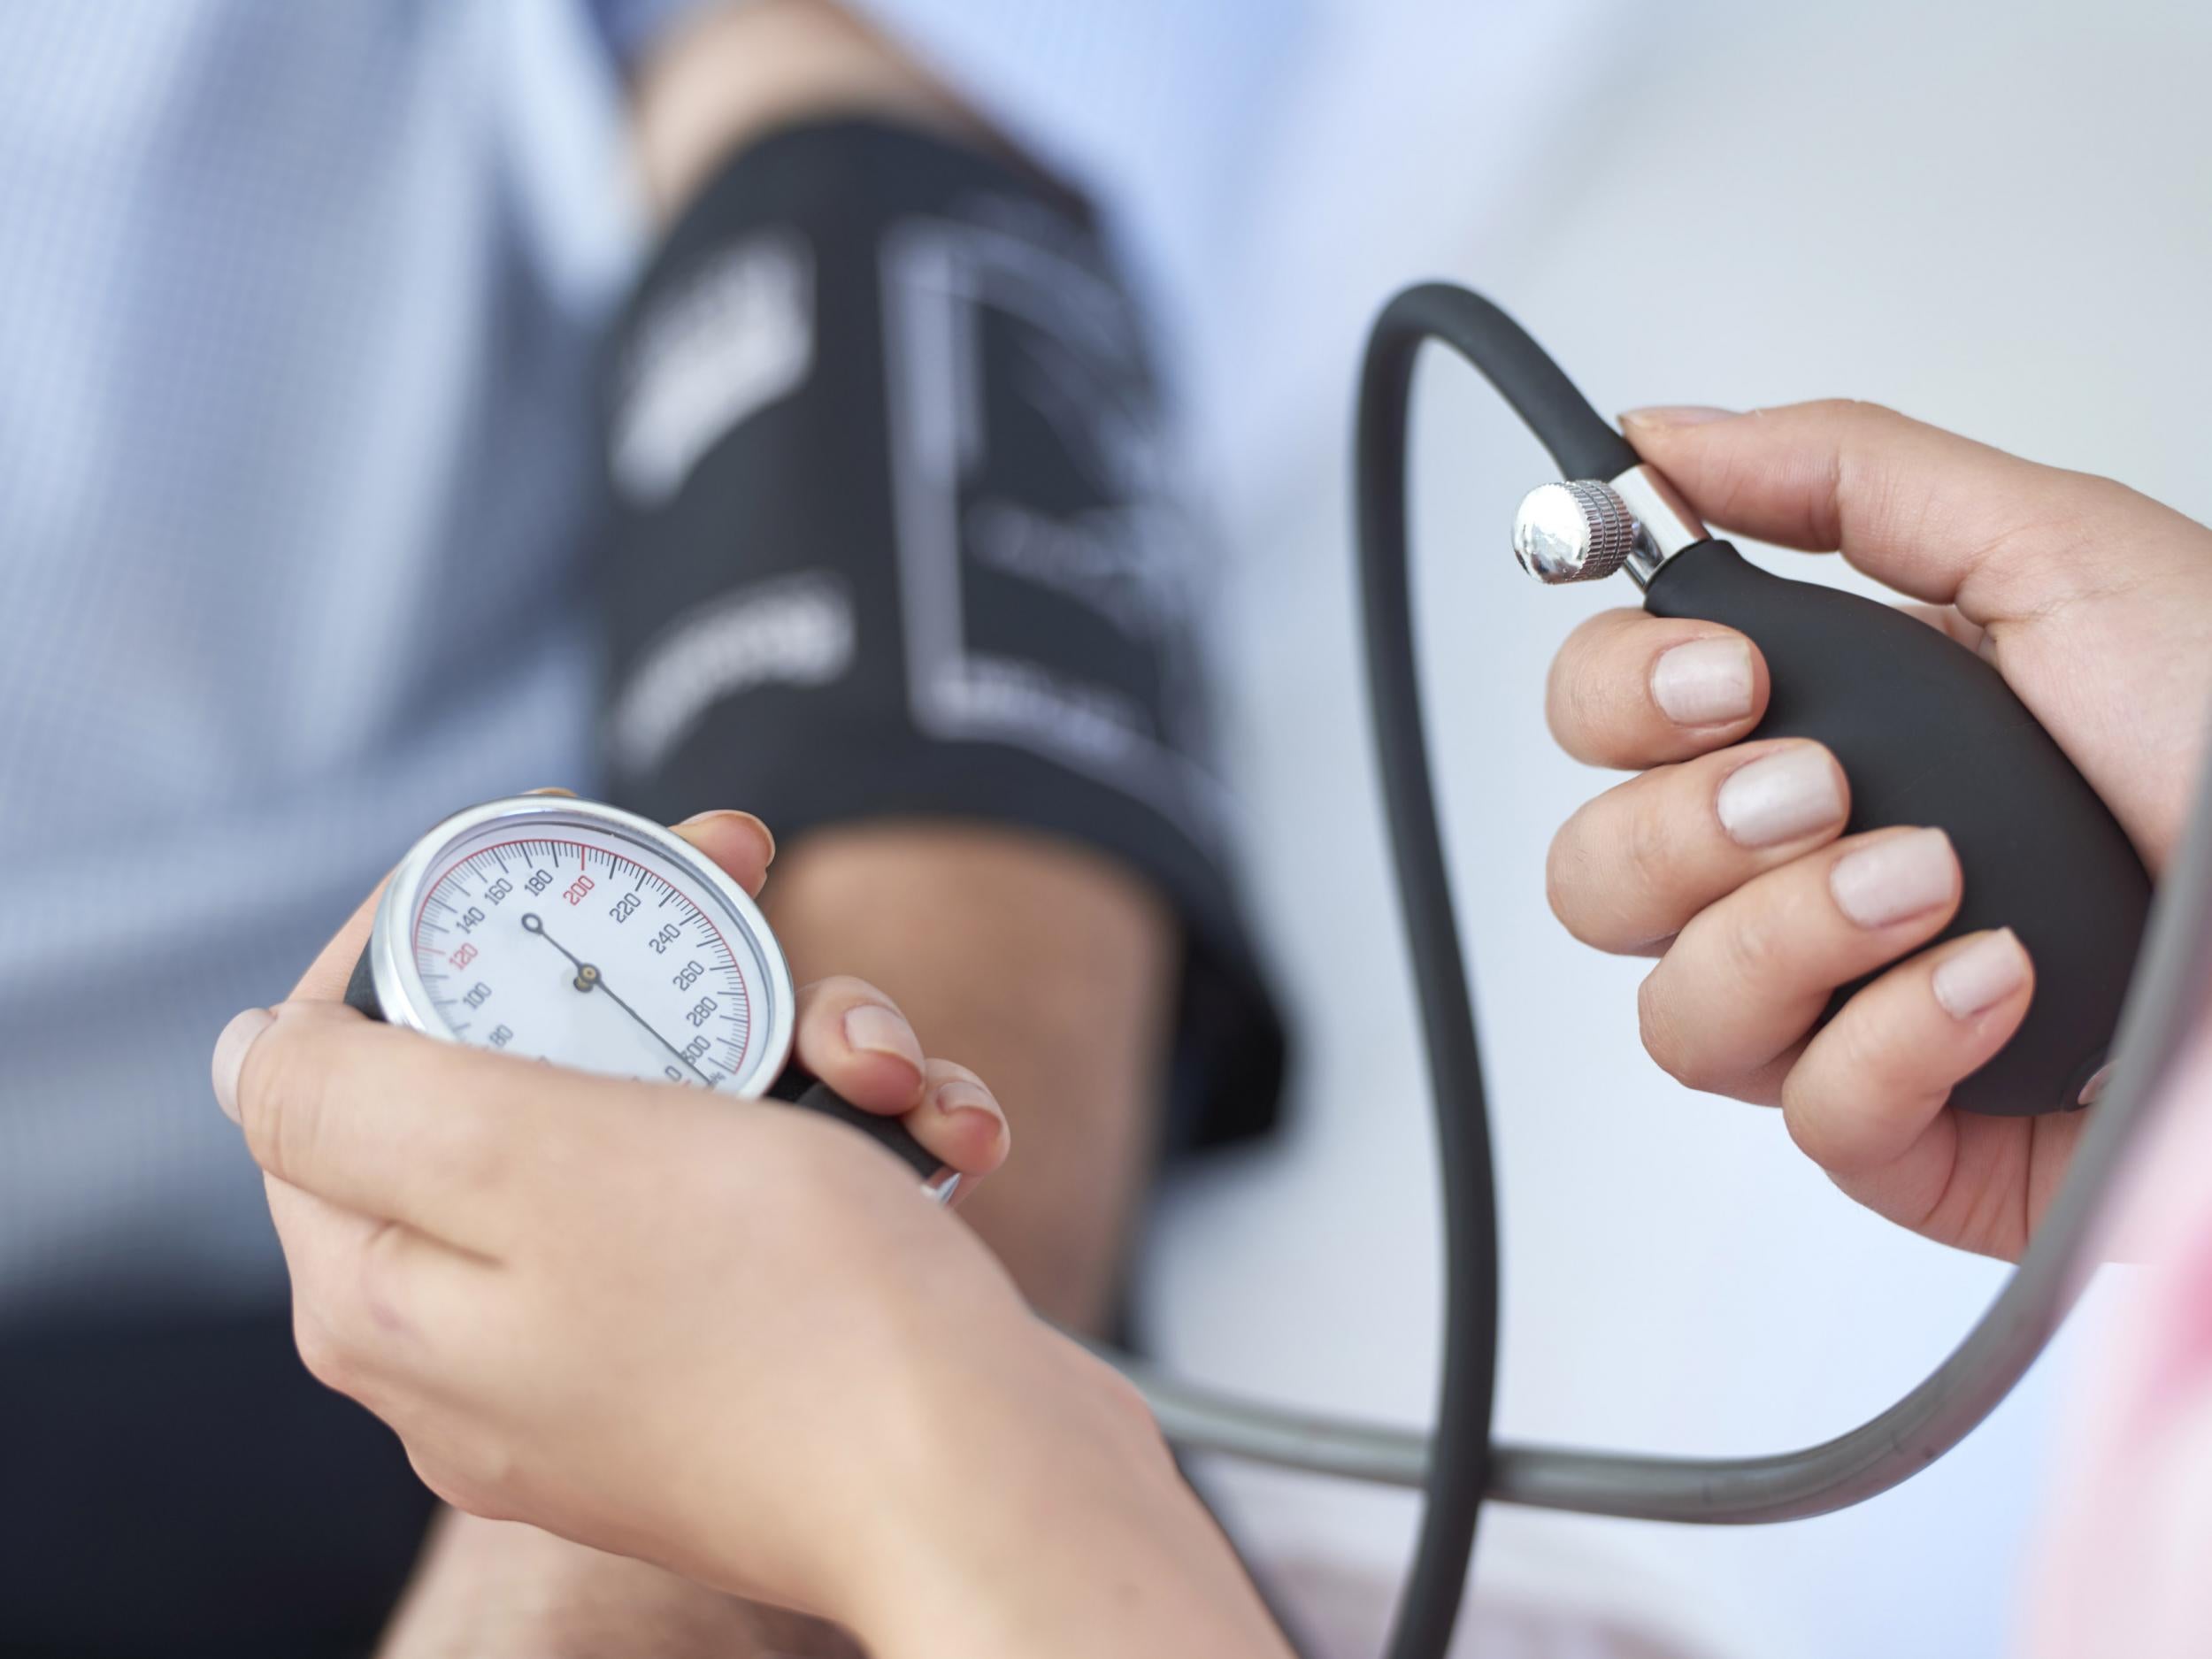 Most people who have high blood pressure don’t realise it